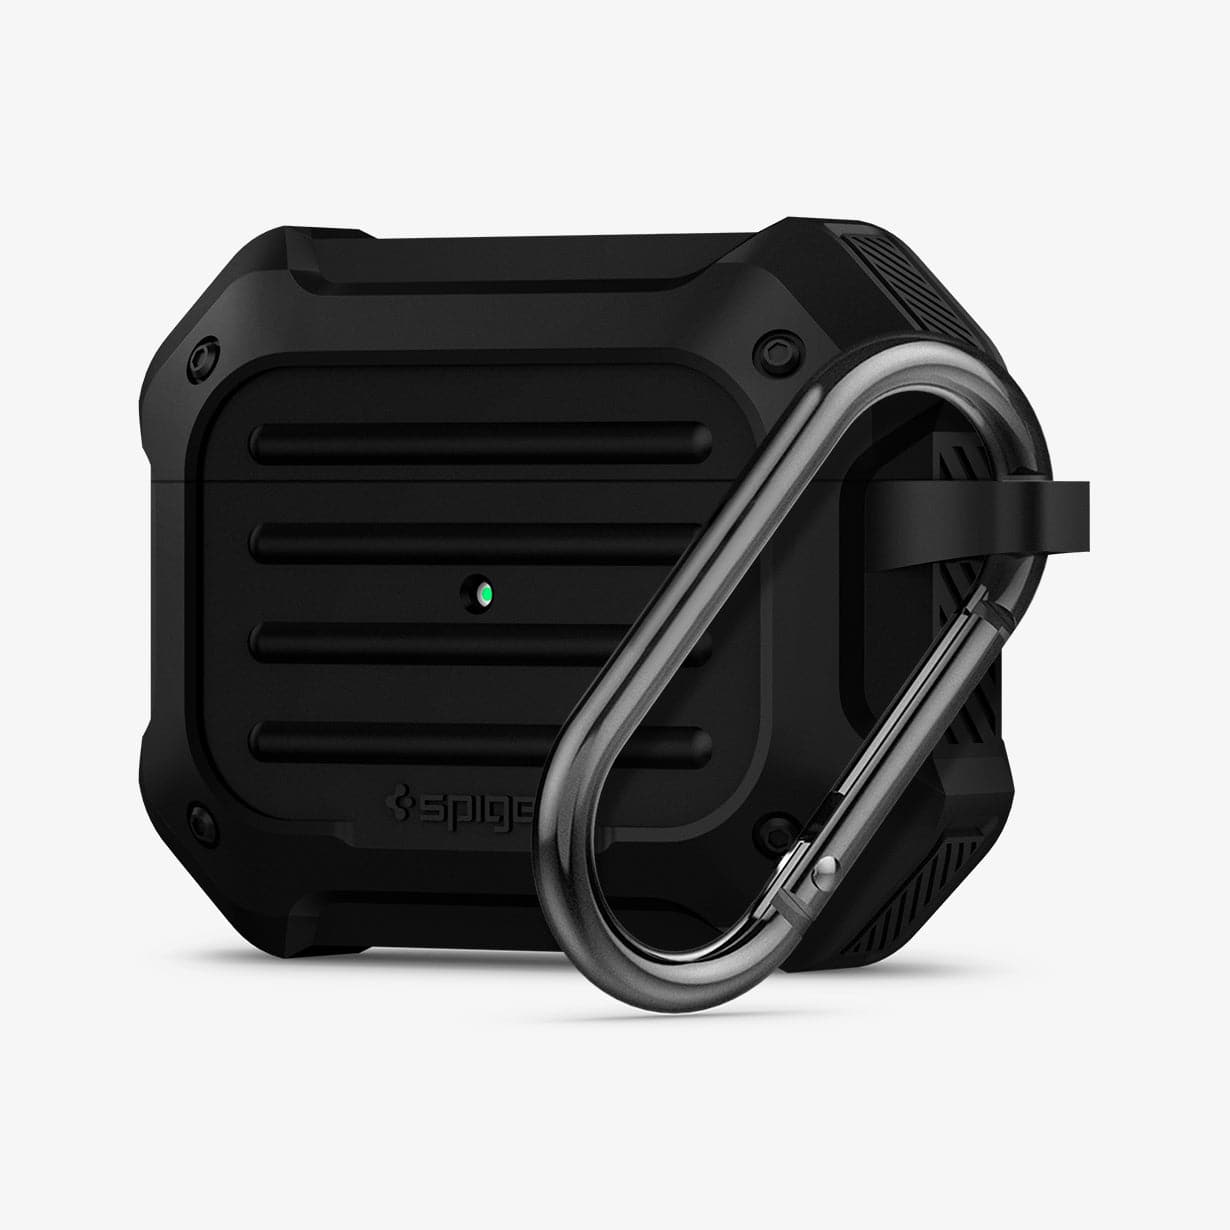 ASD00537 - Apple AirPods Pro Case Tough Armor in black showing the front, side and carabiner